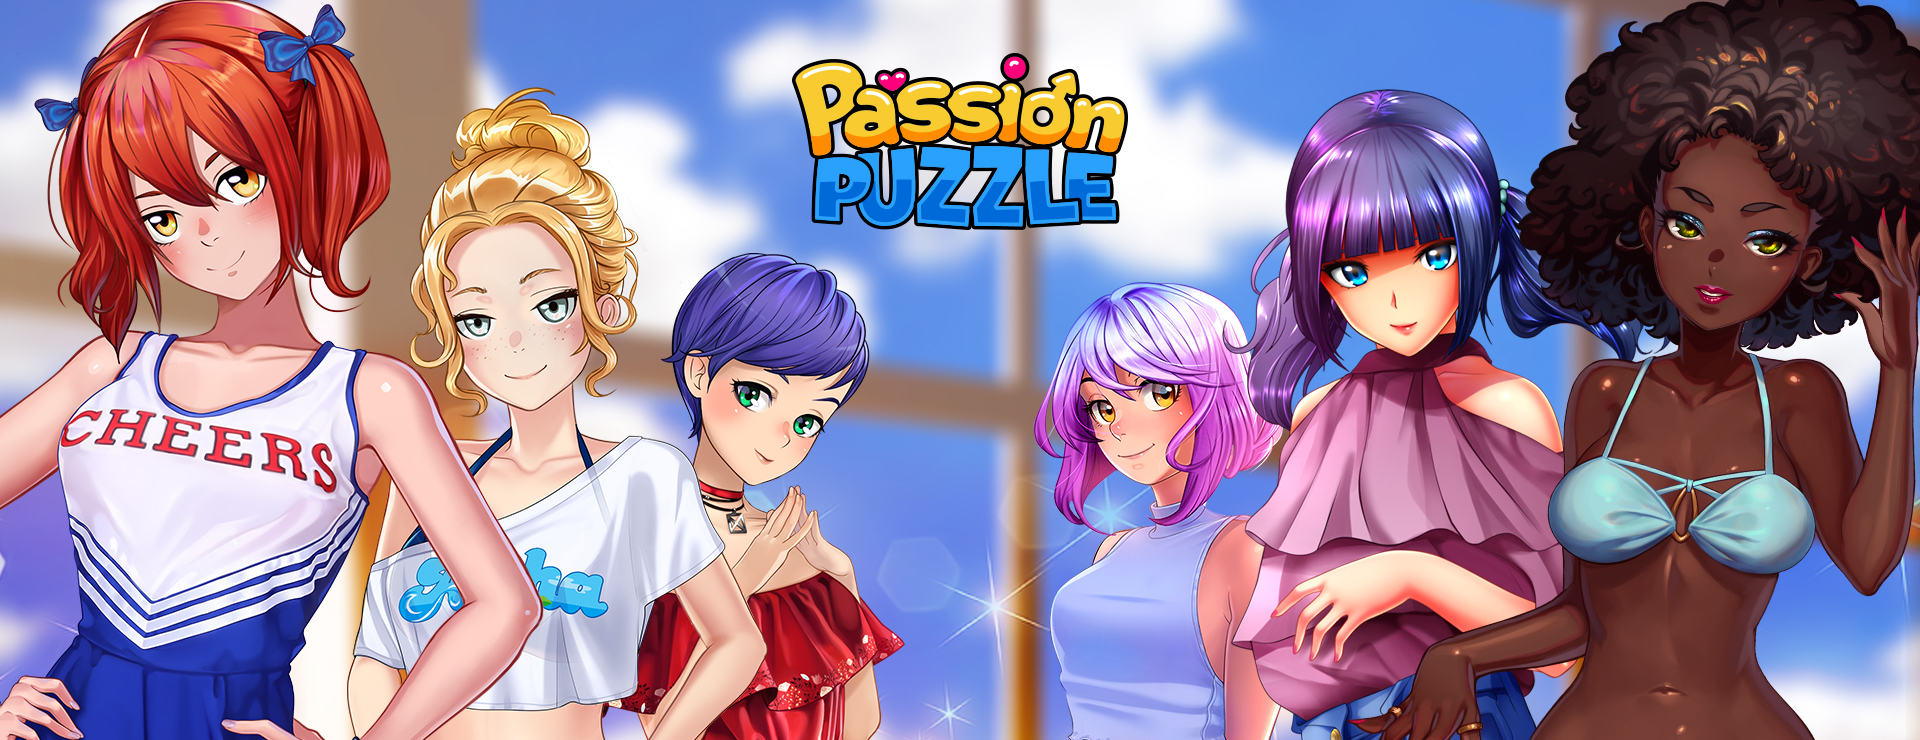 Passion Puzzle - Casual Game